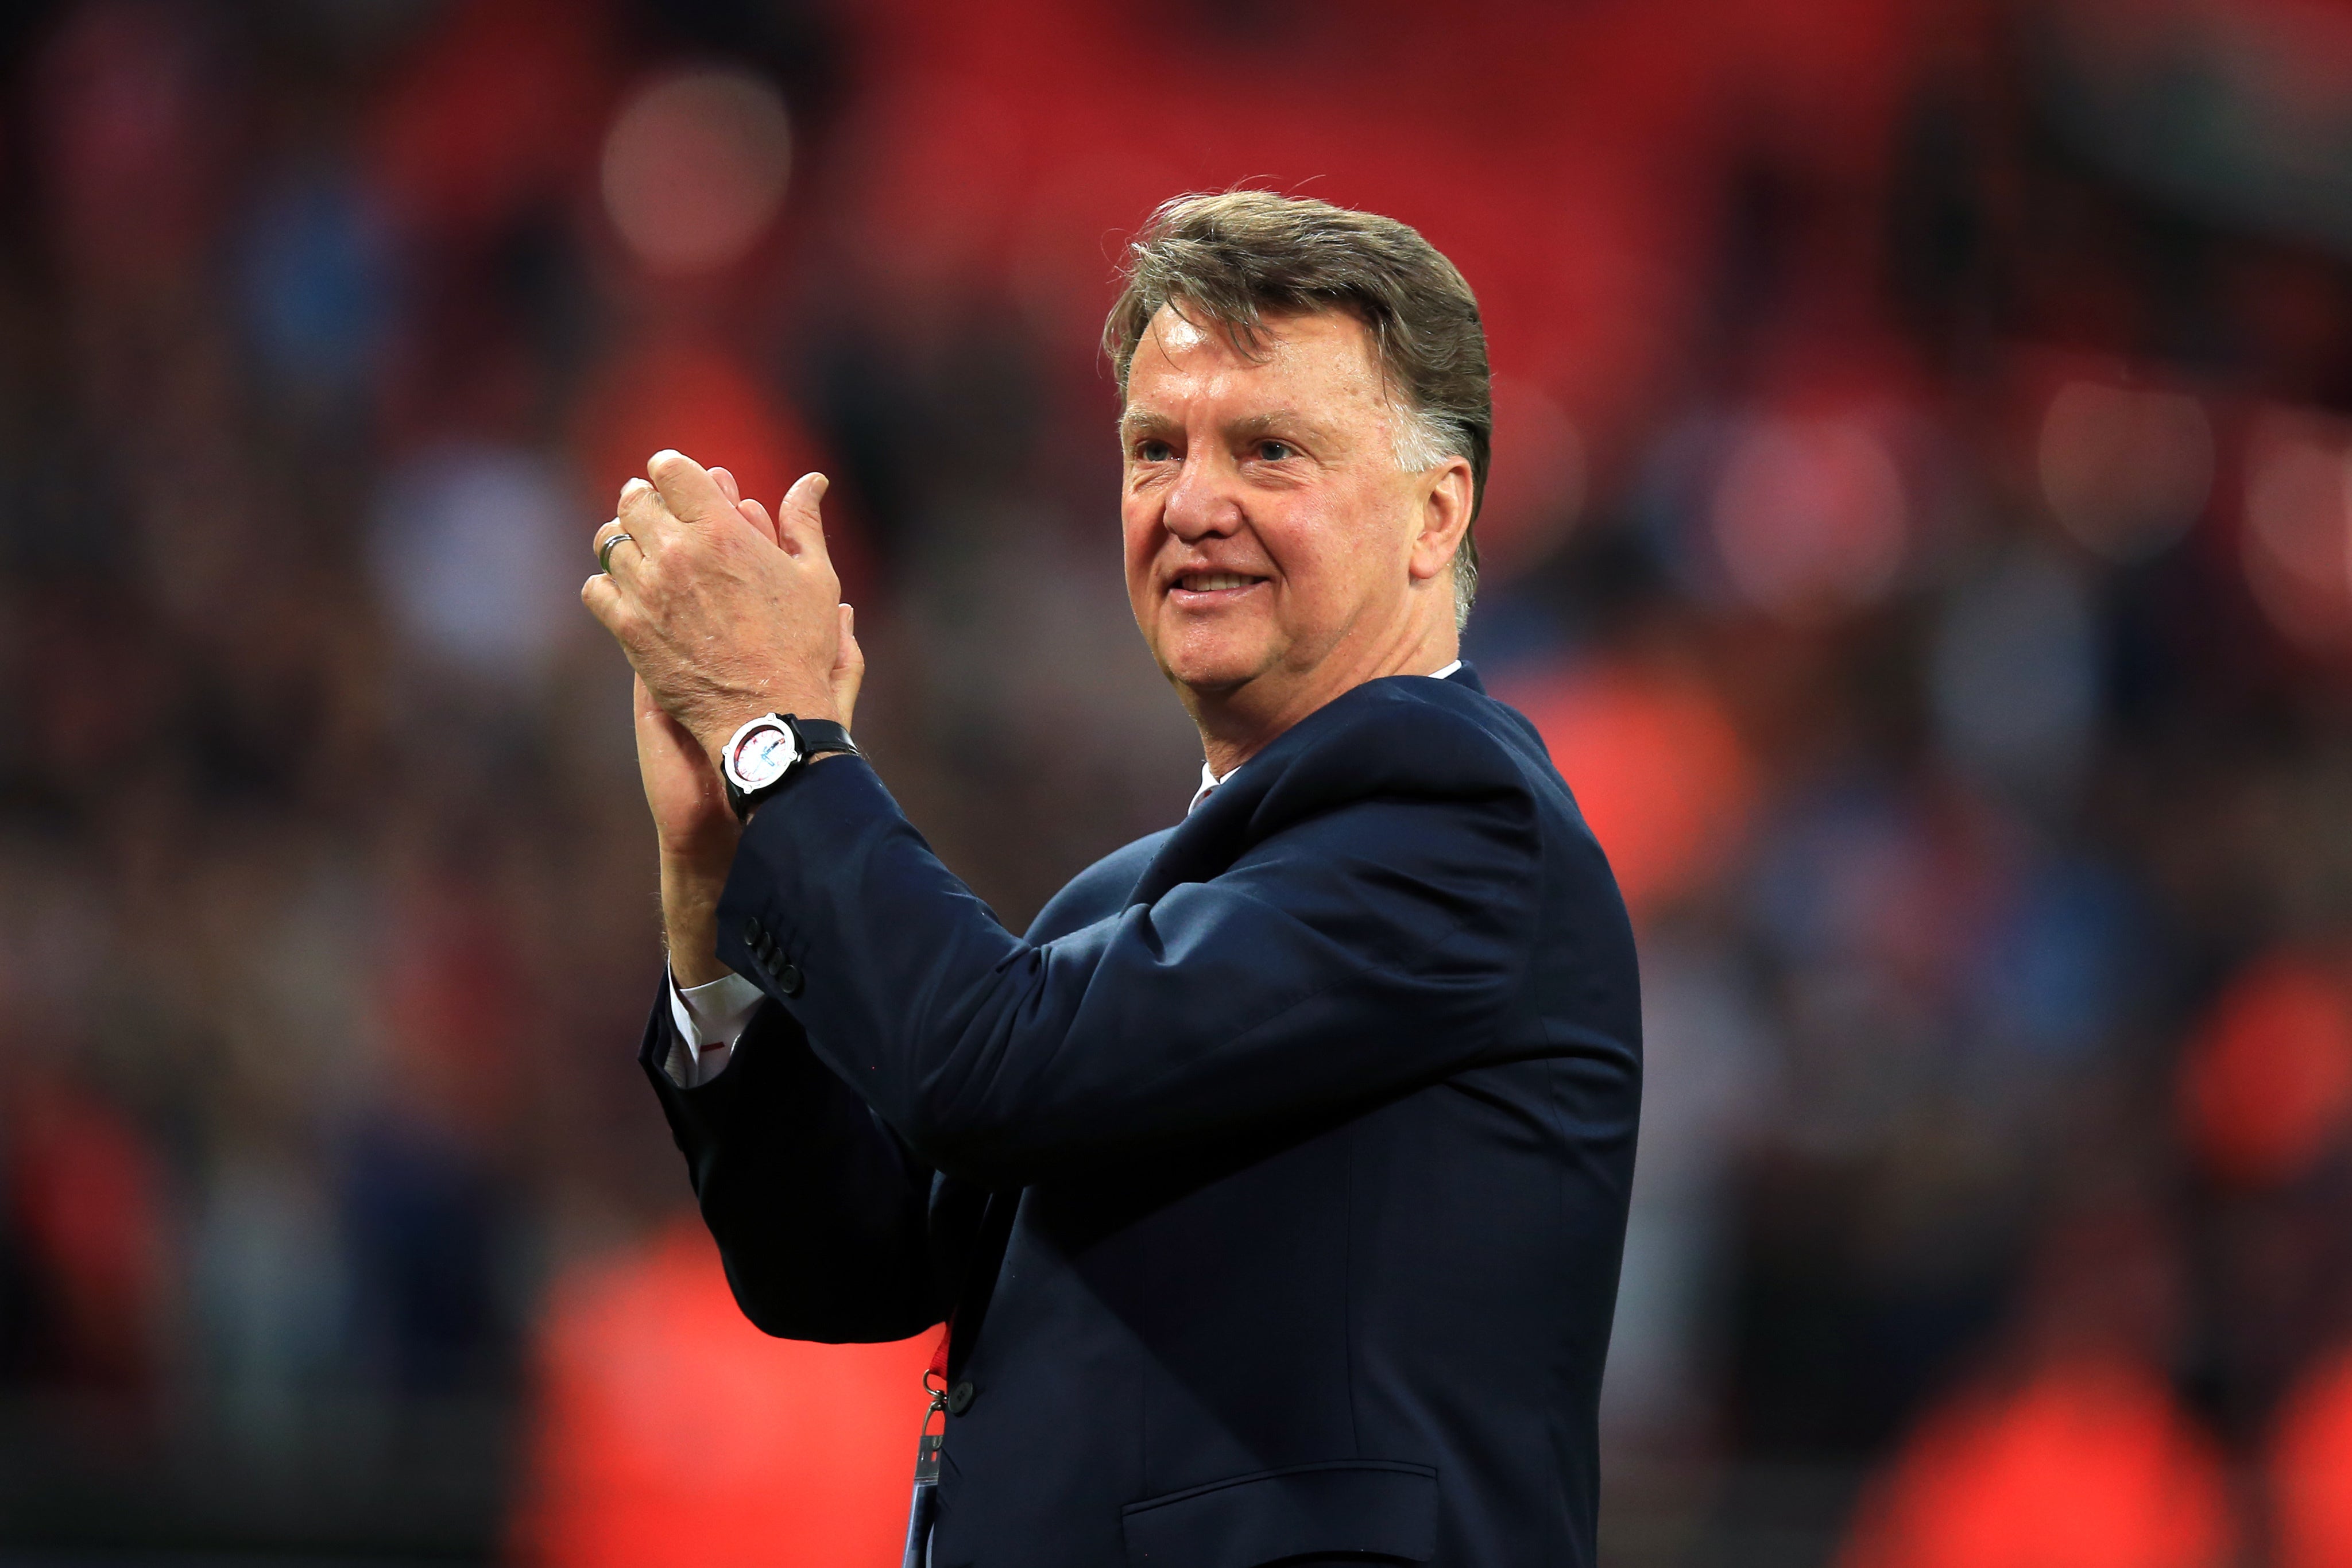 Louis van Gaal formerly managed clubs including Manchester United and Barcelona. (Mike Egerton/PA).